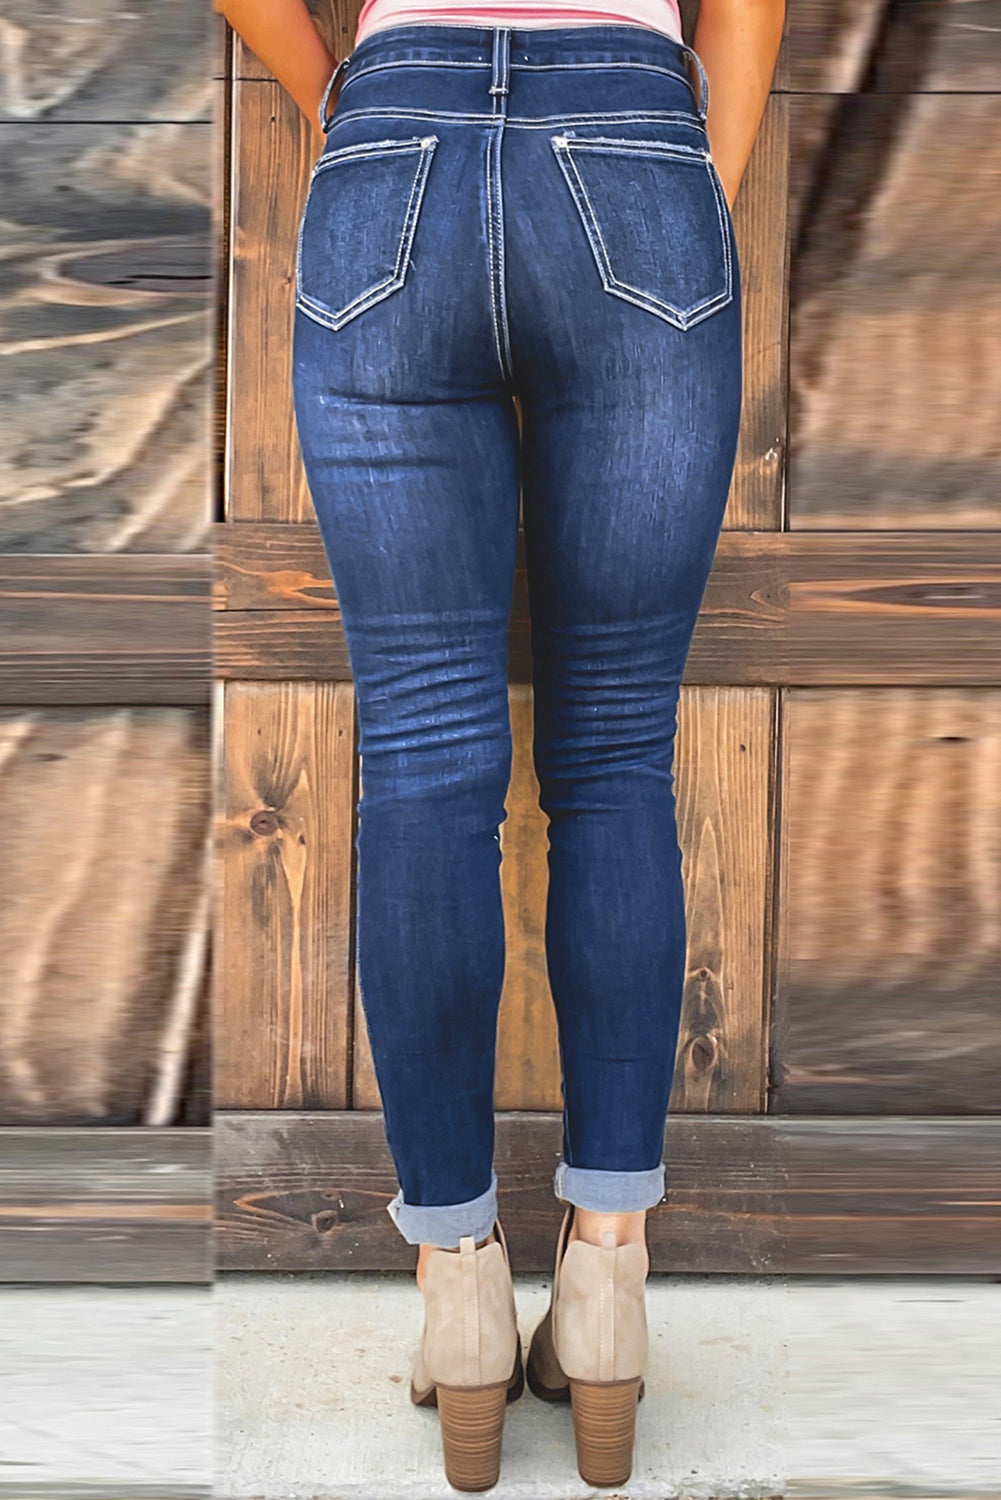 Blue High Rise Skinny Button Fly Jeans Jeans JT's Designer Fashion